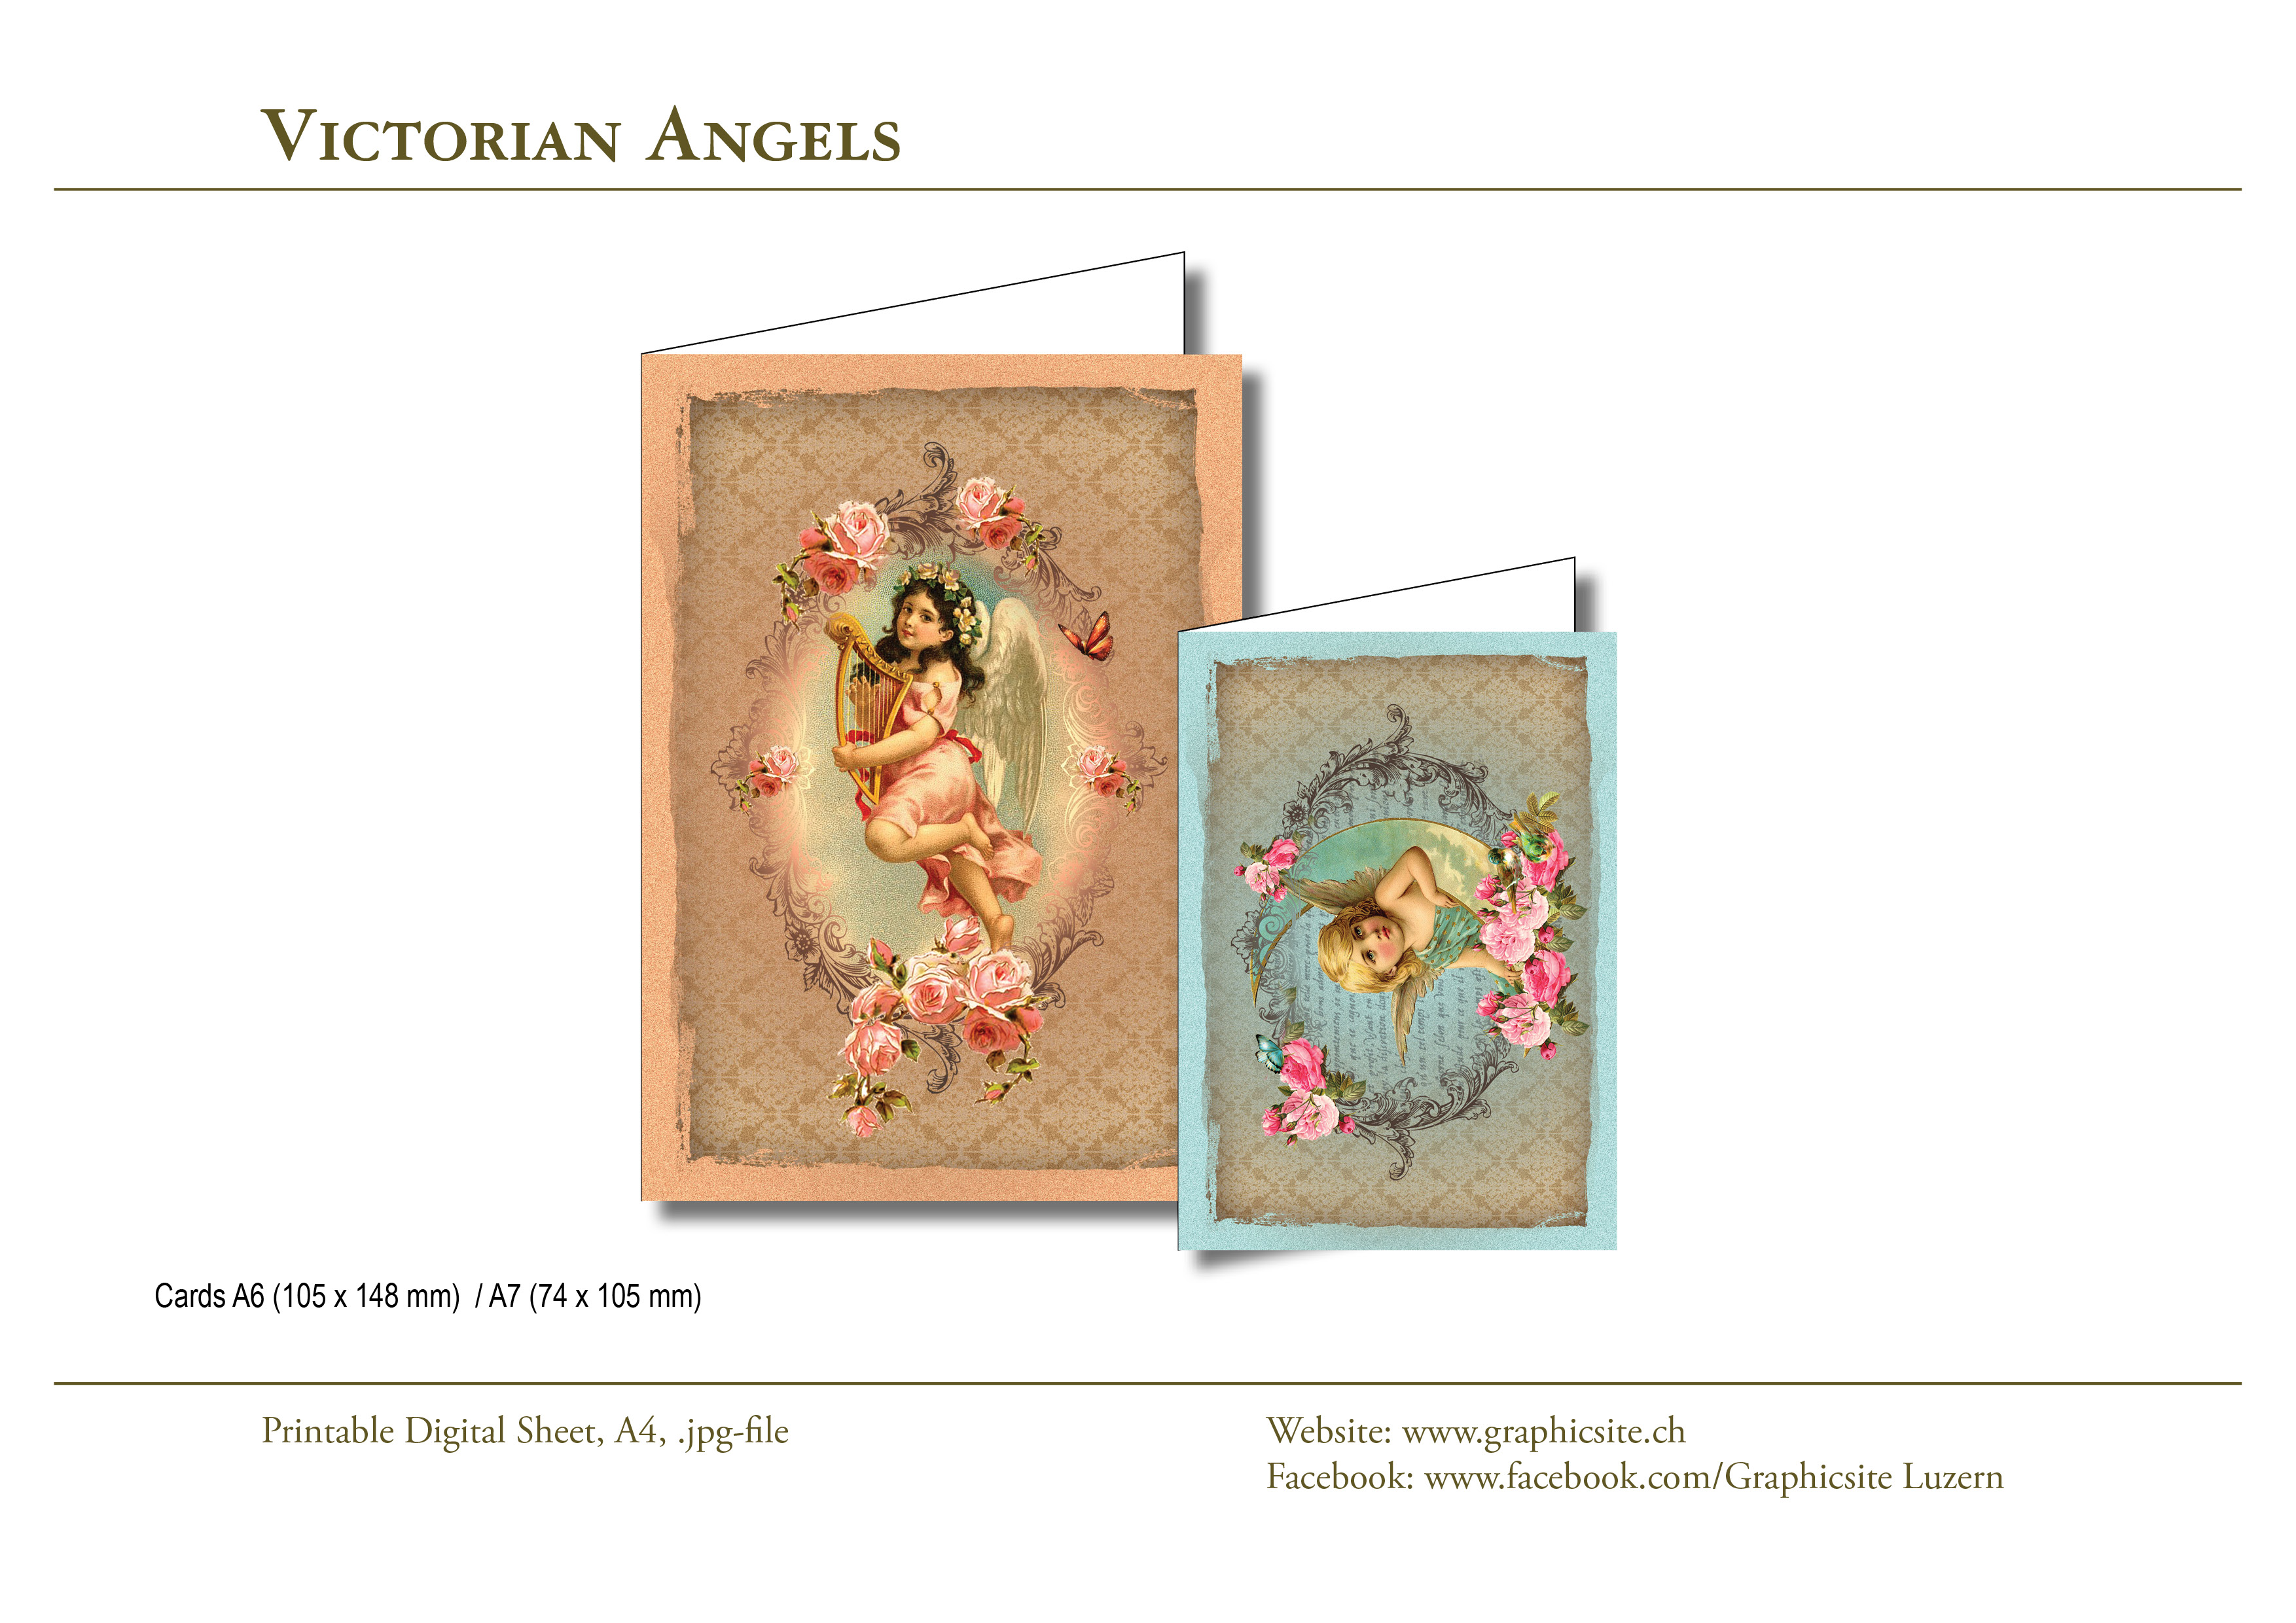 Printable Digital Sheets - DIN A-Formate - Victorian Angels